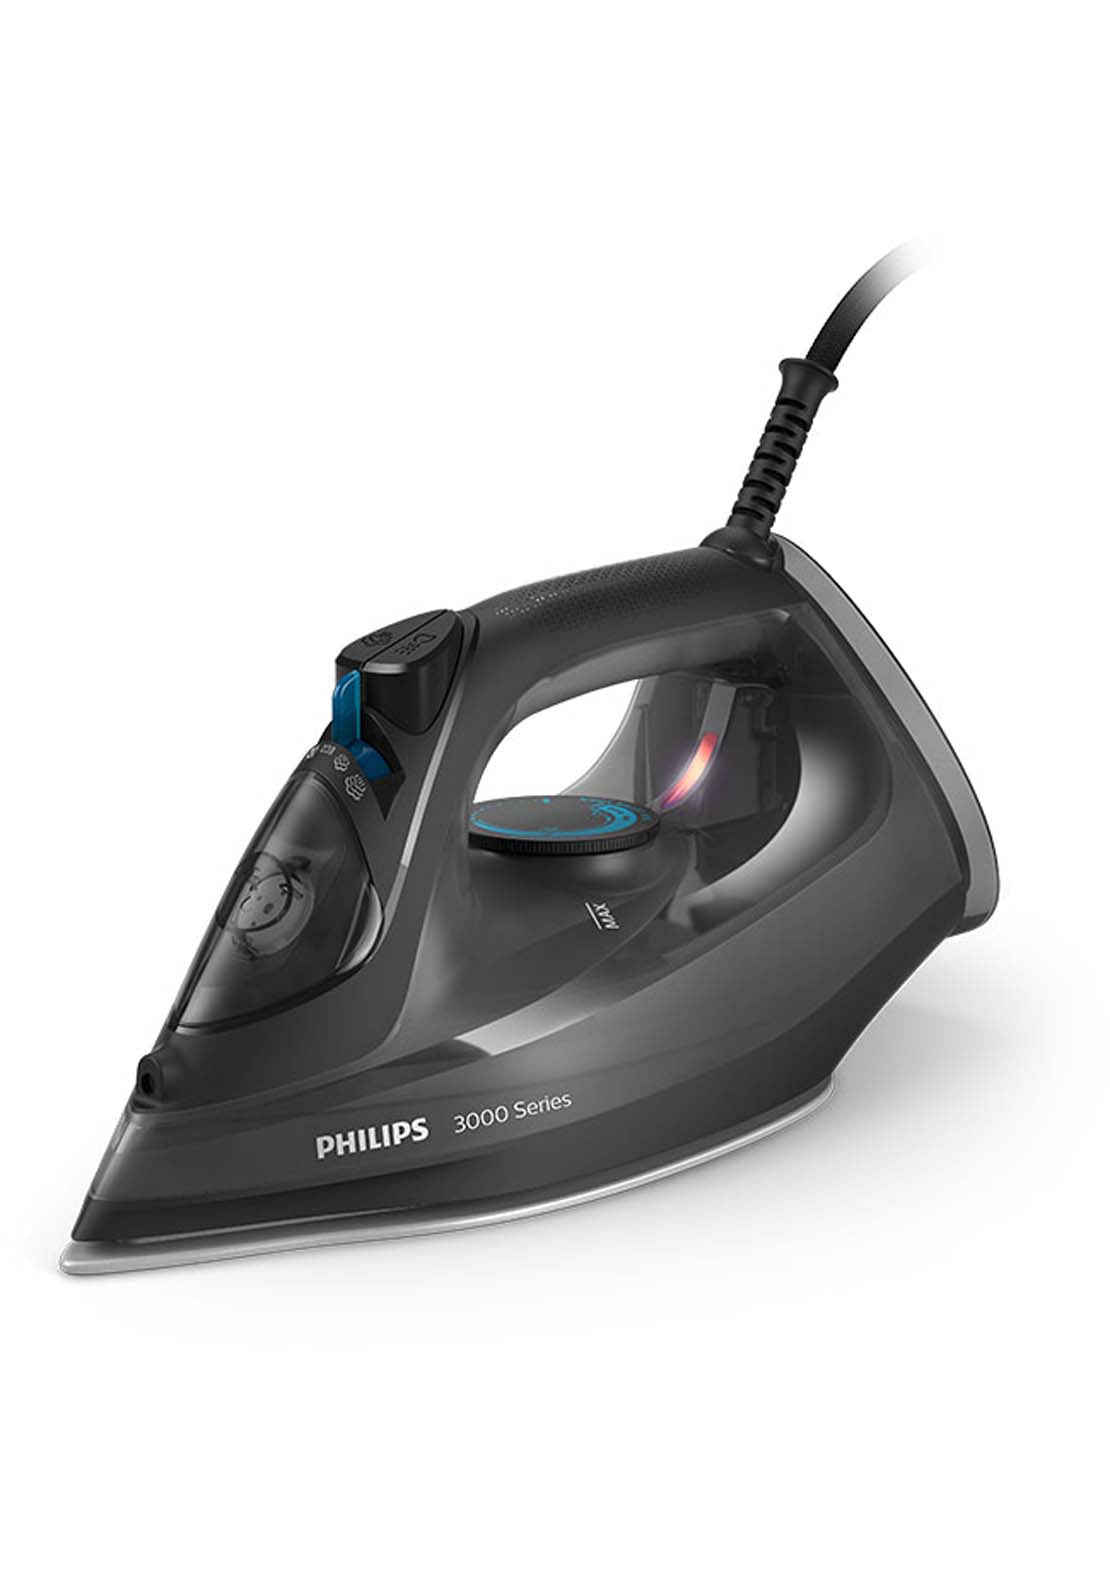 Philips 2600W Steam | Dst304189 1 Shaws Department Stores